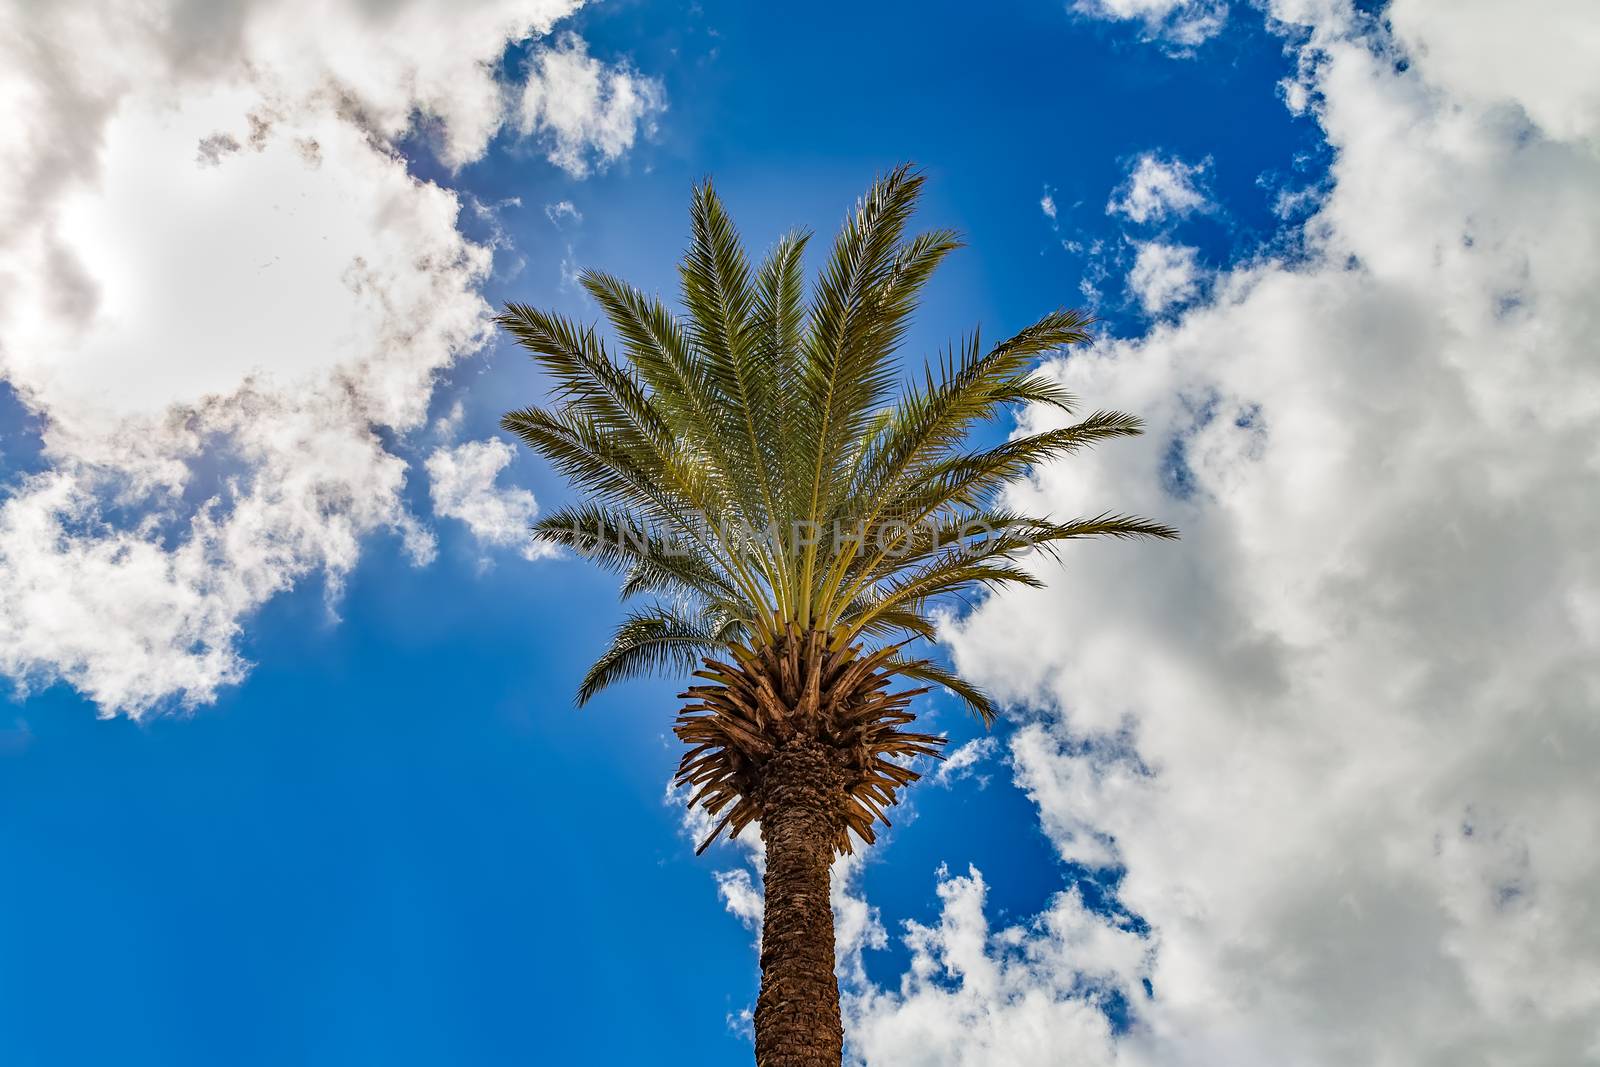 View of a lone palm tree with blue sky and clouds as a background. Caribbean Island of Curacao, Dutch Antilles.